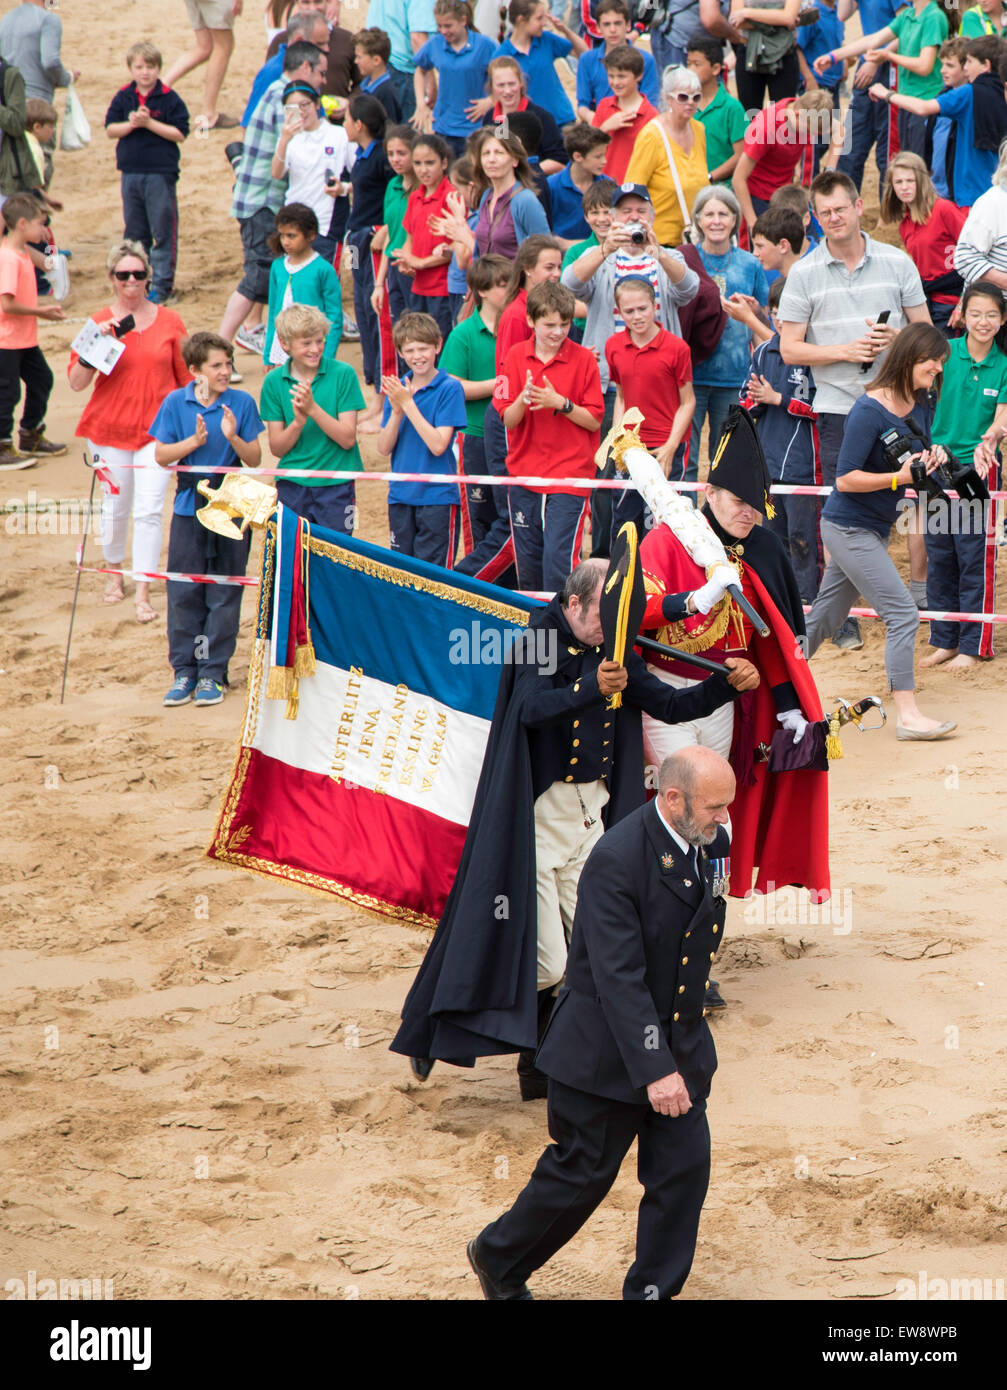 Broadstairs, Kent. 20th June, 2015. In commemoration of events after the Battle of Waterloo, a despatch is being carried from Belgium to London between 18 and 21 June. This morning, the despatch arrived at Broadstairs, Kent, carried by characters representing Major Henry Percy and Commander James White RN who brought the original despatch in 1815. The captured French Eagles are carried across te beach. Credit:  Paul Martin/Alamy Live News Stock Photo